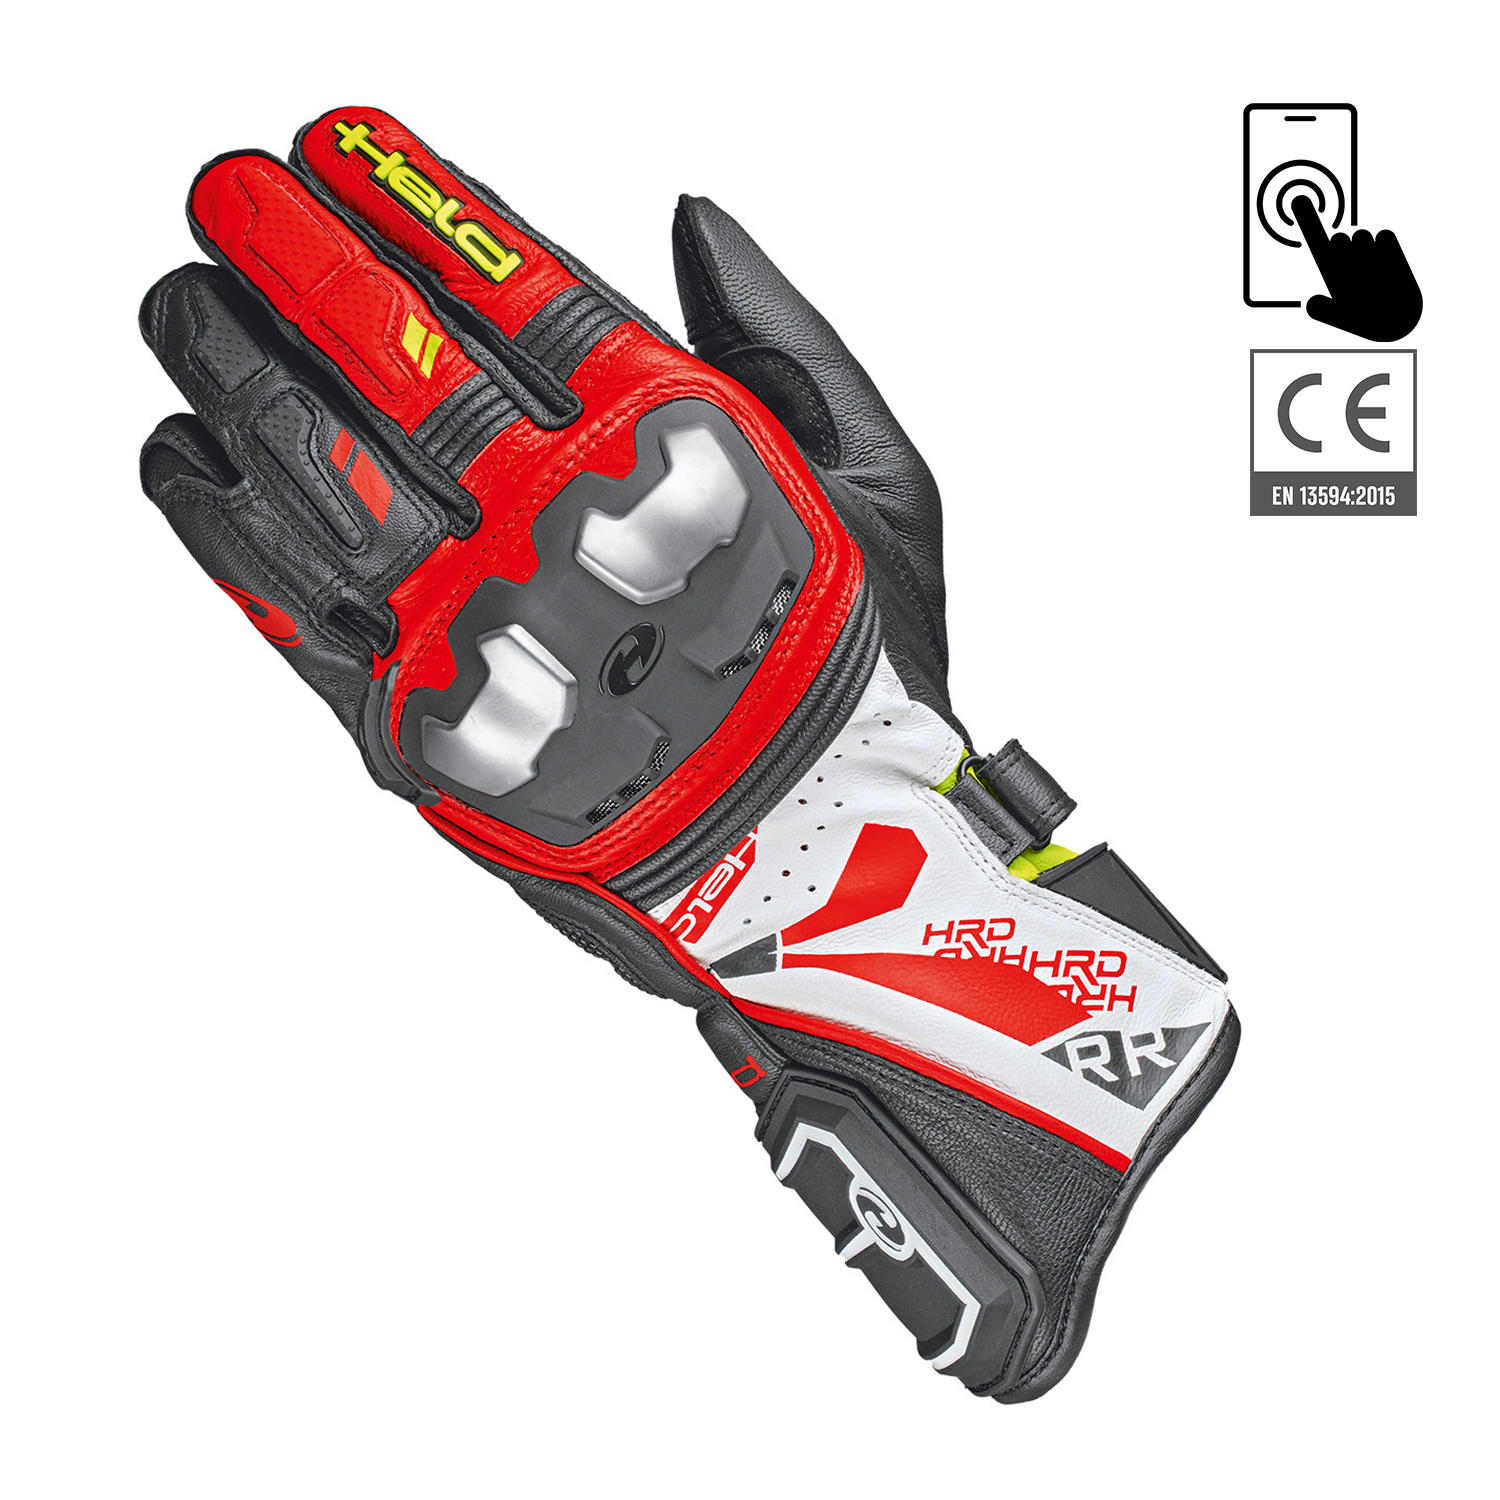 Held Akira RR Gloves Black-White-Red - Available in Various Sizes